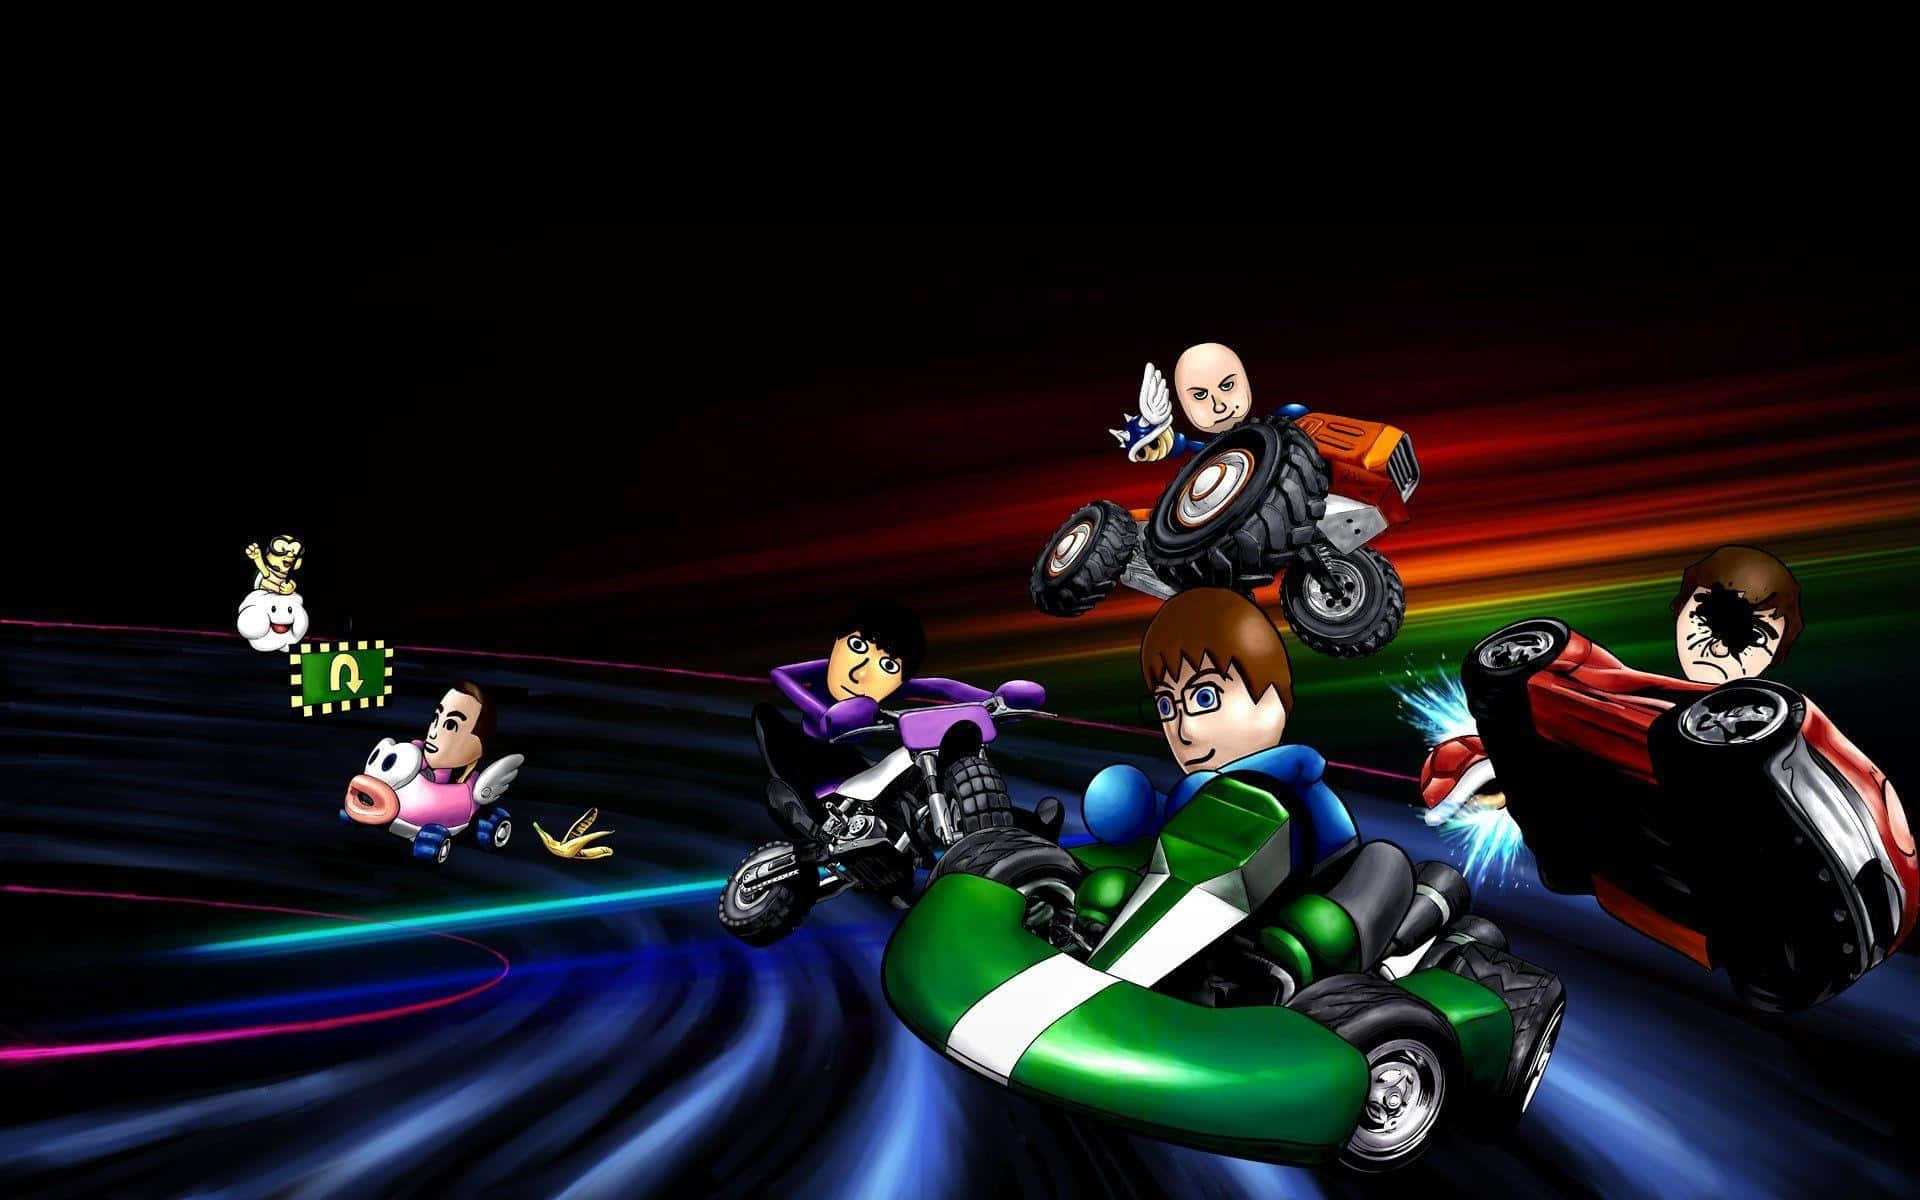 "Start your engines - It's time for the thrill of Mario Kart!"